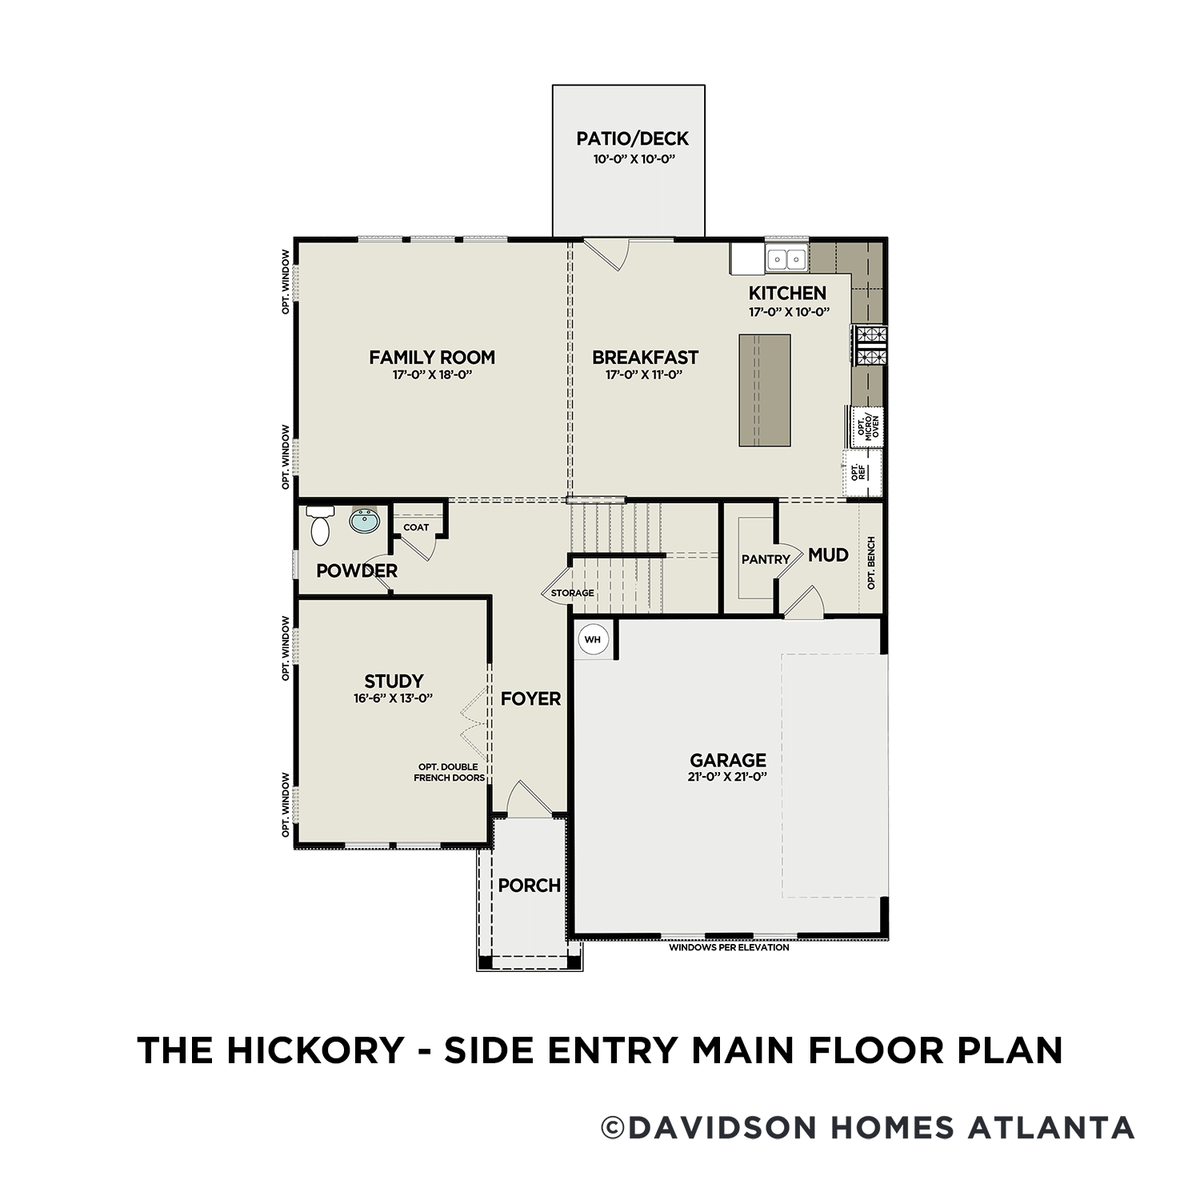 1 - The Hickory A – Side Entry floor plan layout for 14 Riverburch Run in Davidson Homes' Riverwood community.